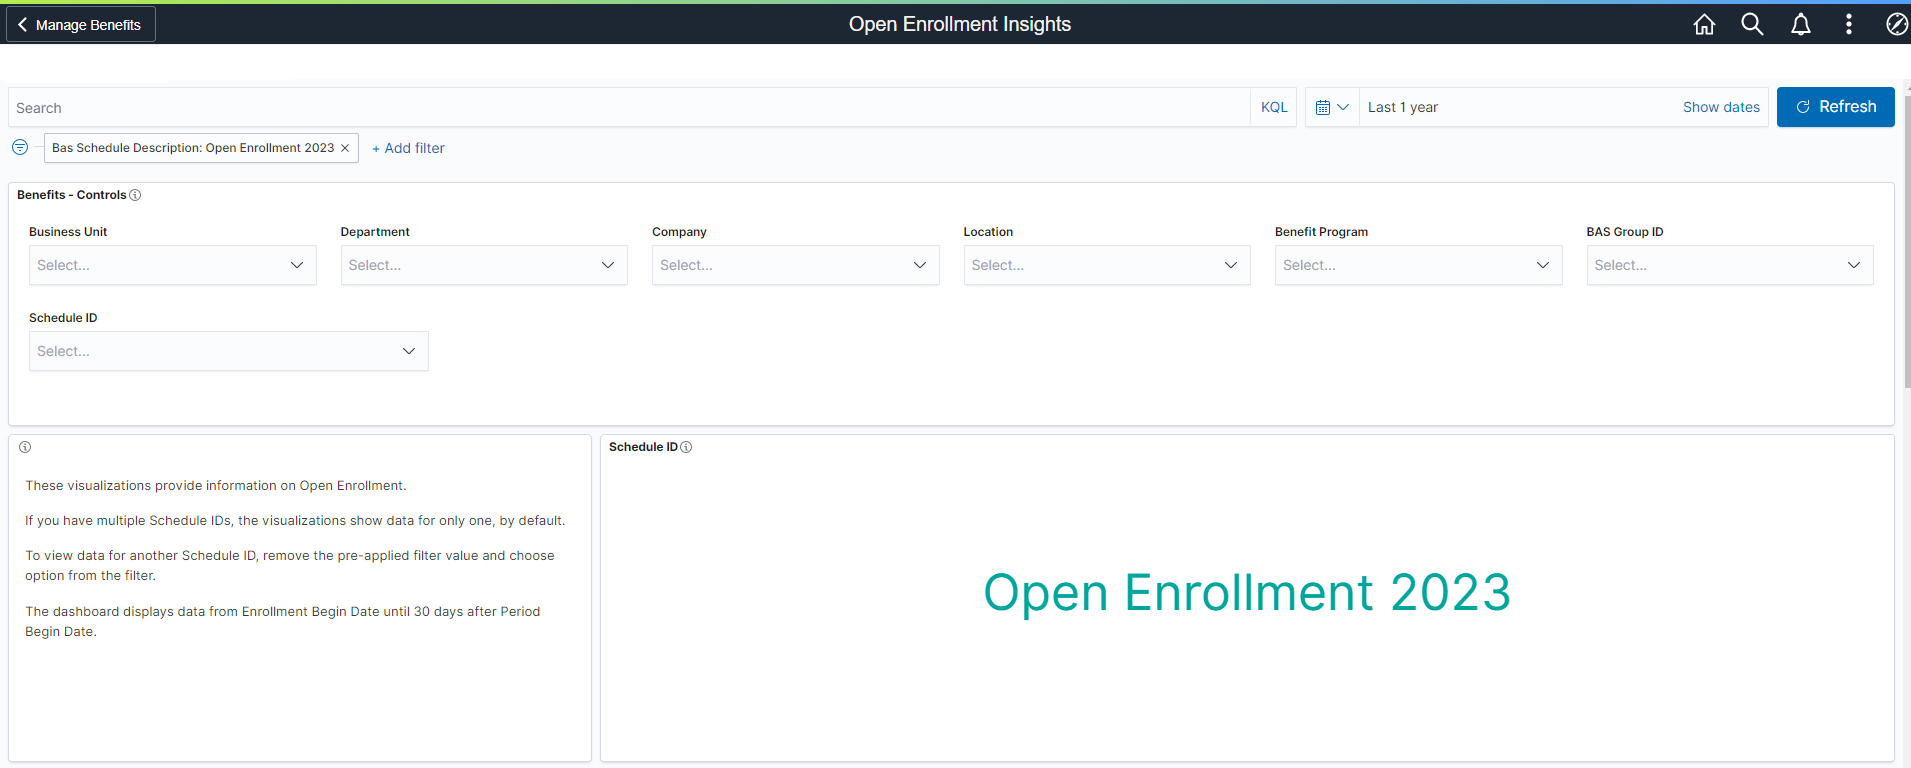 Open Enrollment Insights (Page 1 of 5)